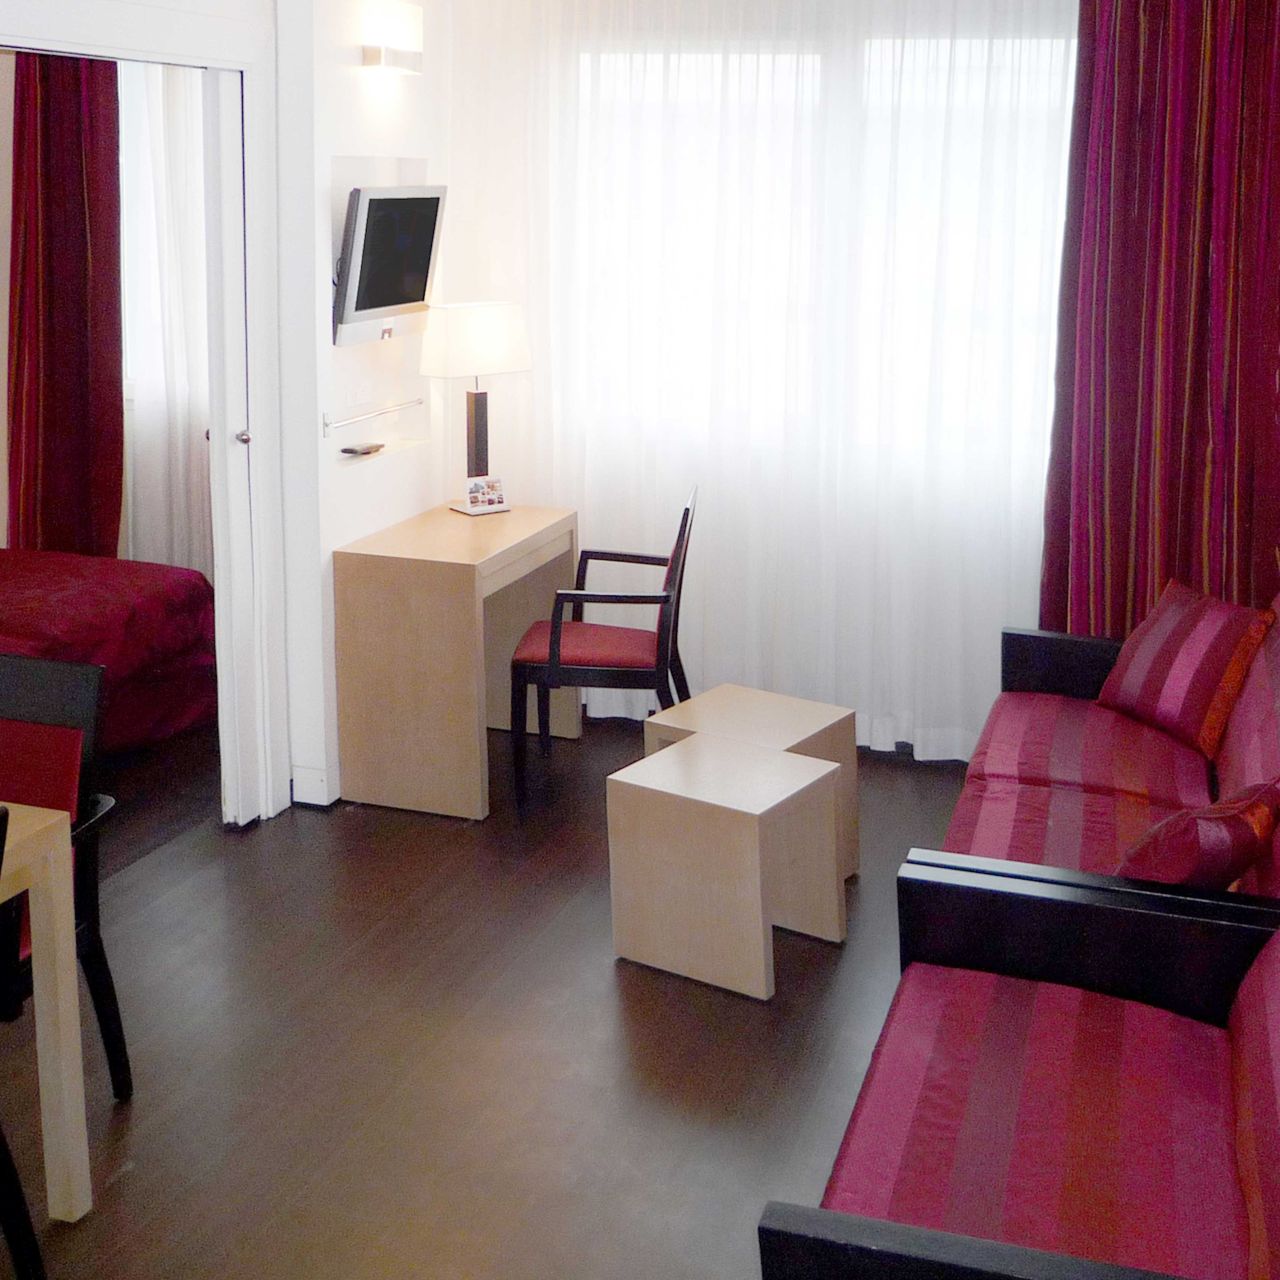 Residhome Val d'Europe Apparthotel - Montévrain - Great prices at HOTEL INFO